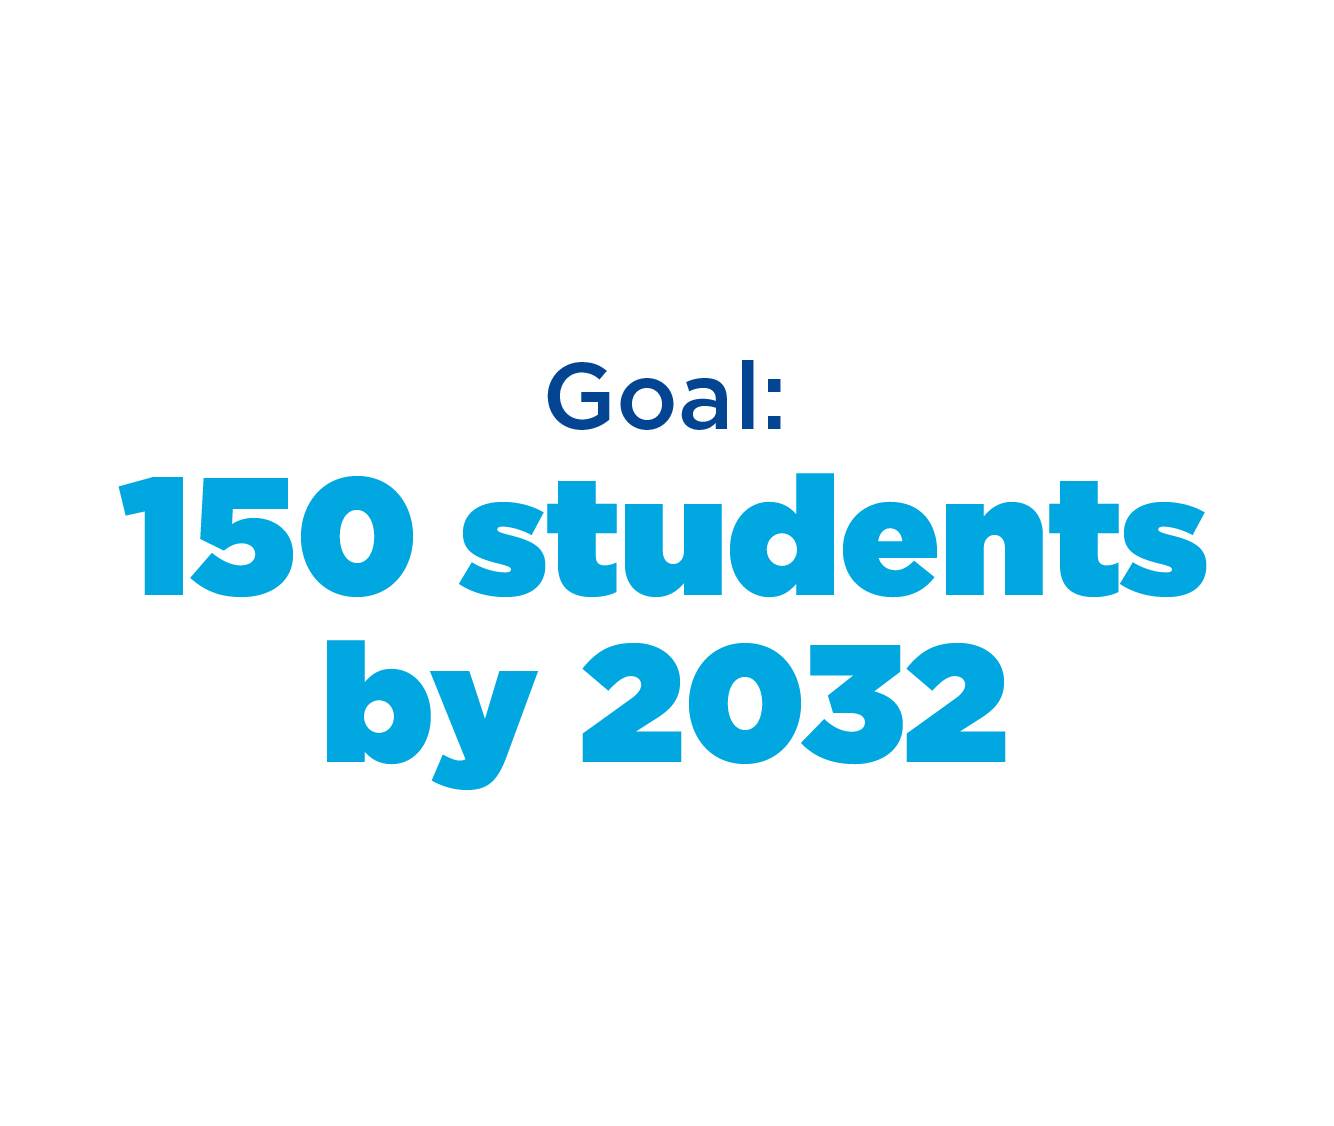 Goal: 150 students by 2032